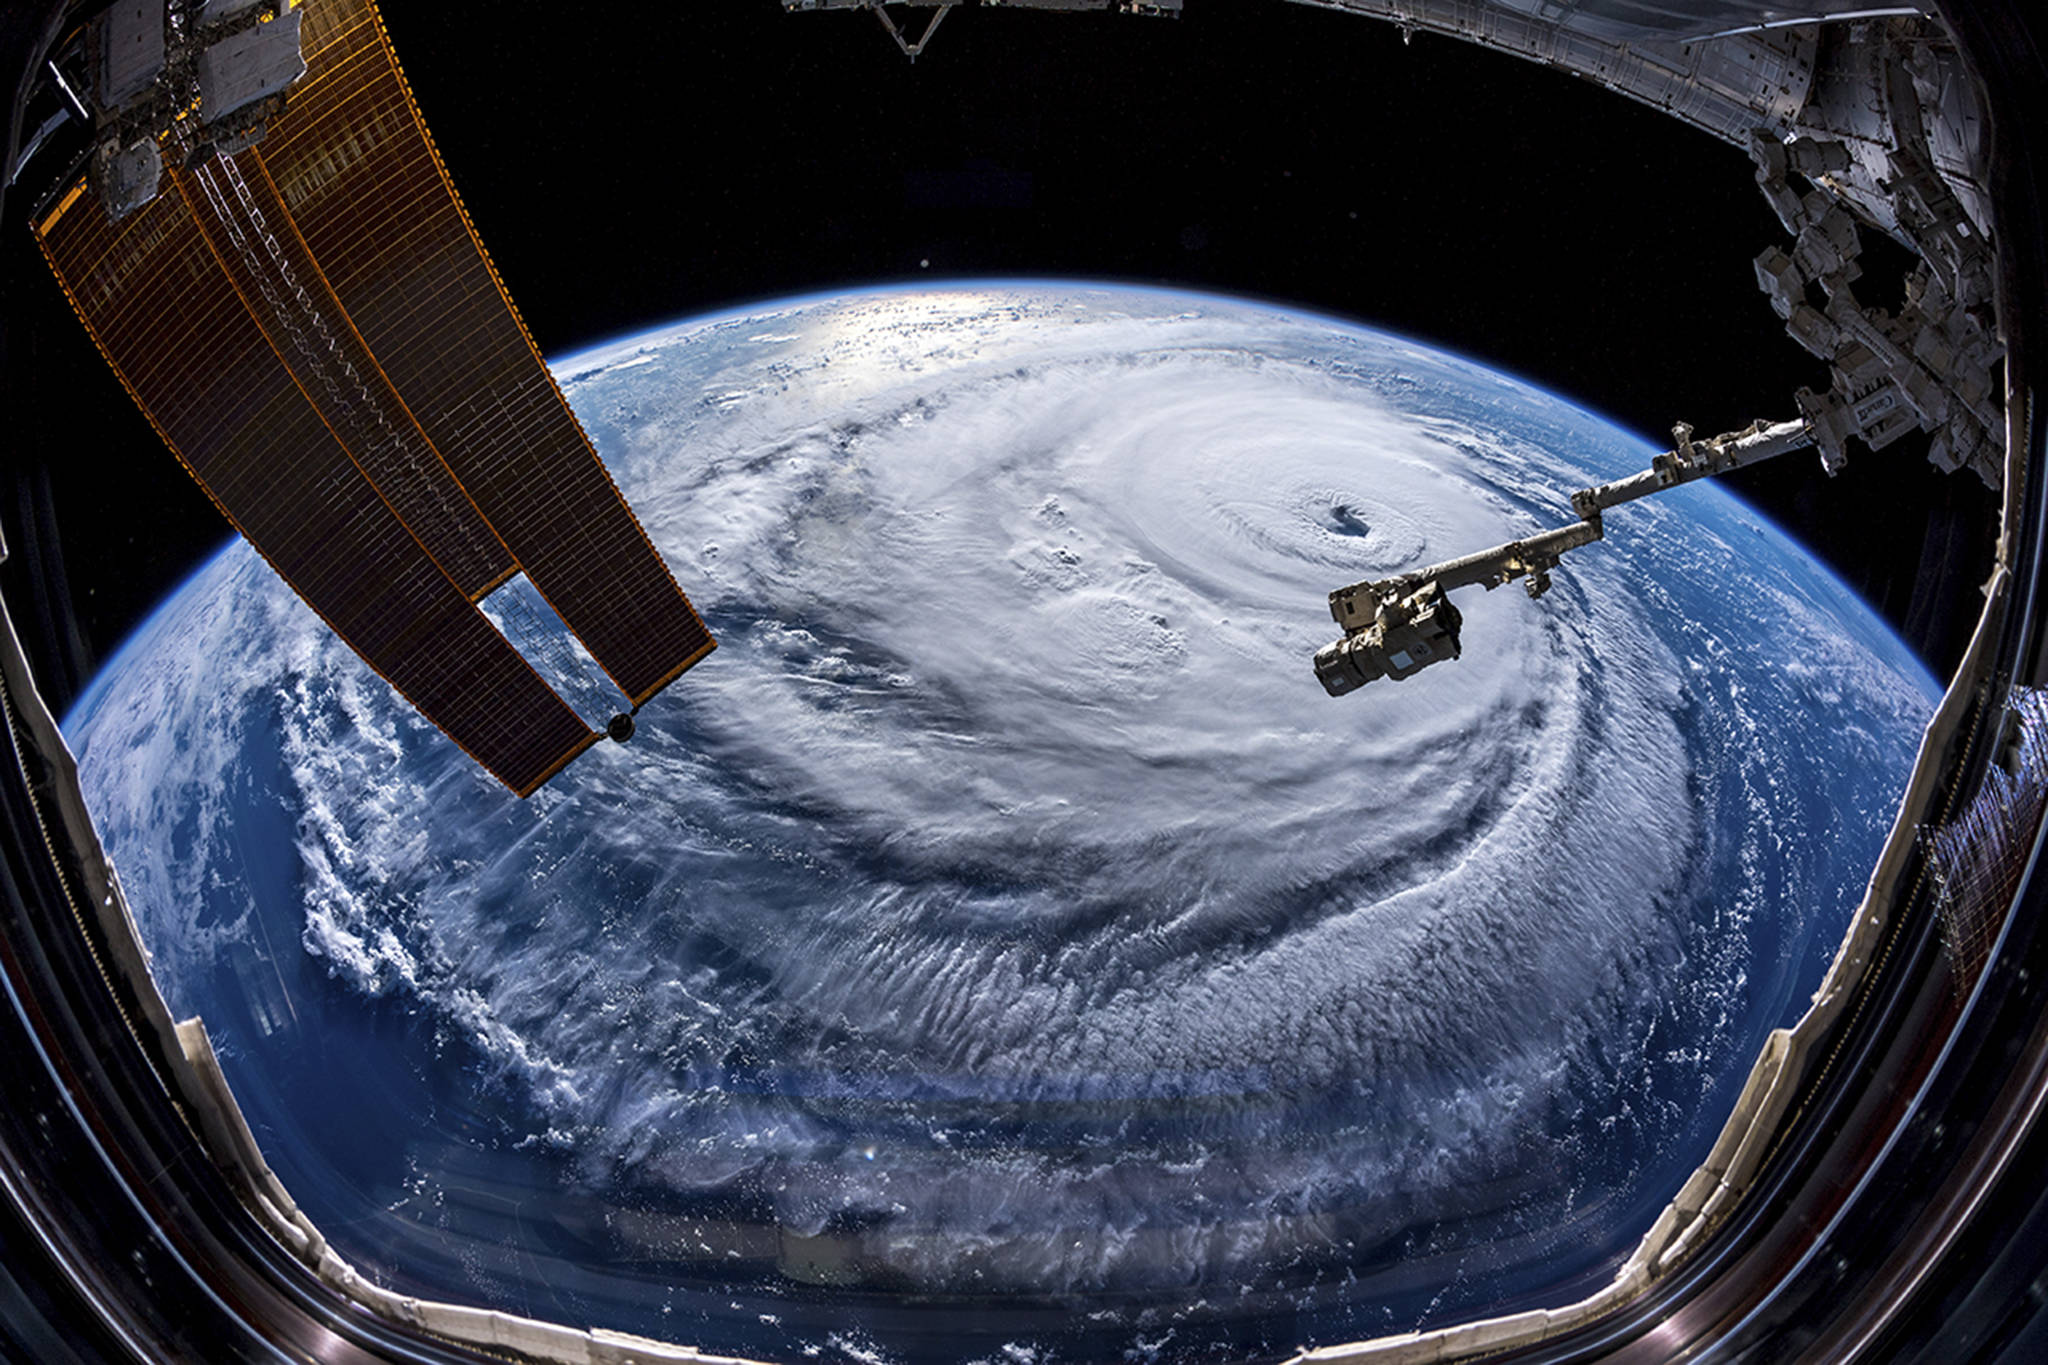 Hurricane Florence is seen from the International Space Station. (Alexander Gerst/NASA)